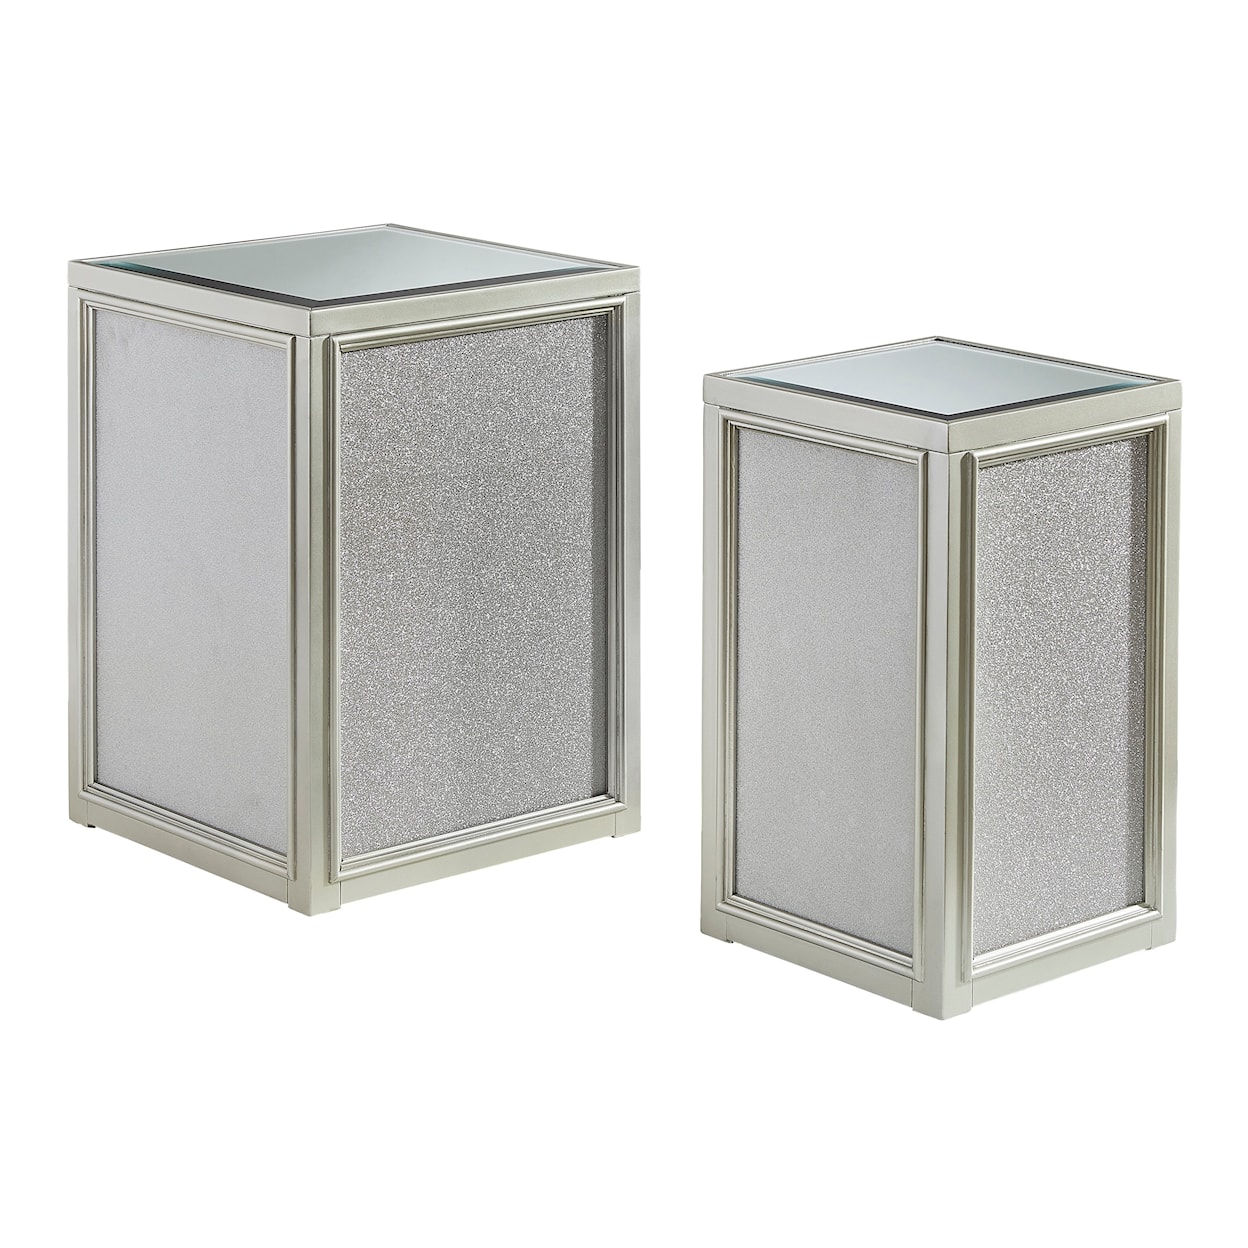 Signature Design by Ashley Traleena Nesting End Table (set of 2)